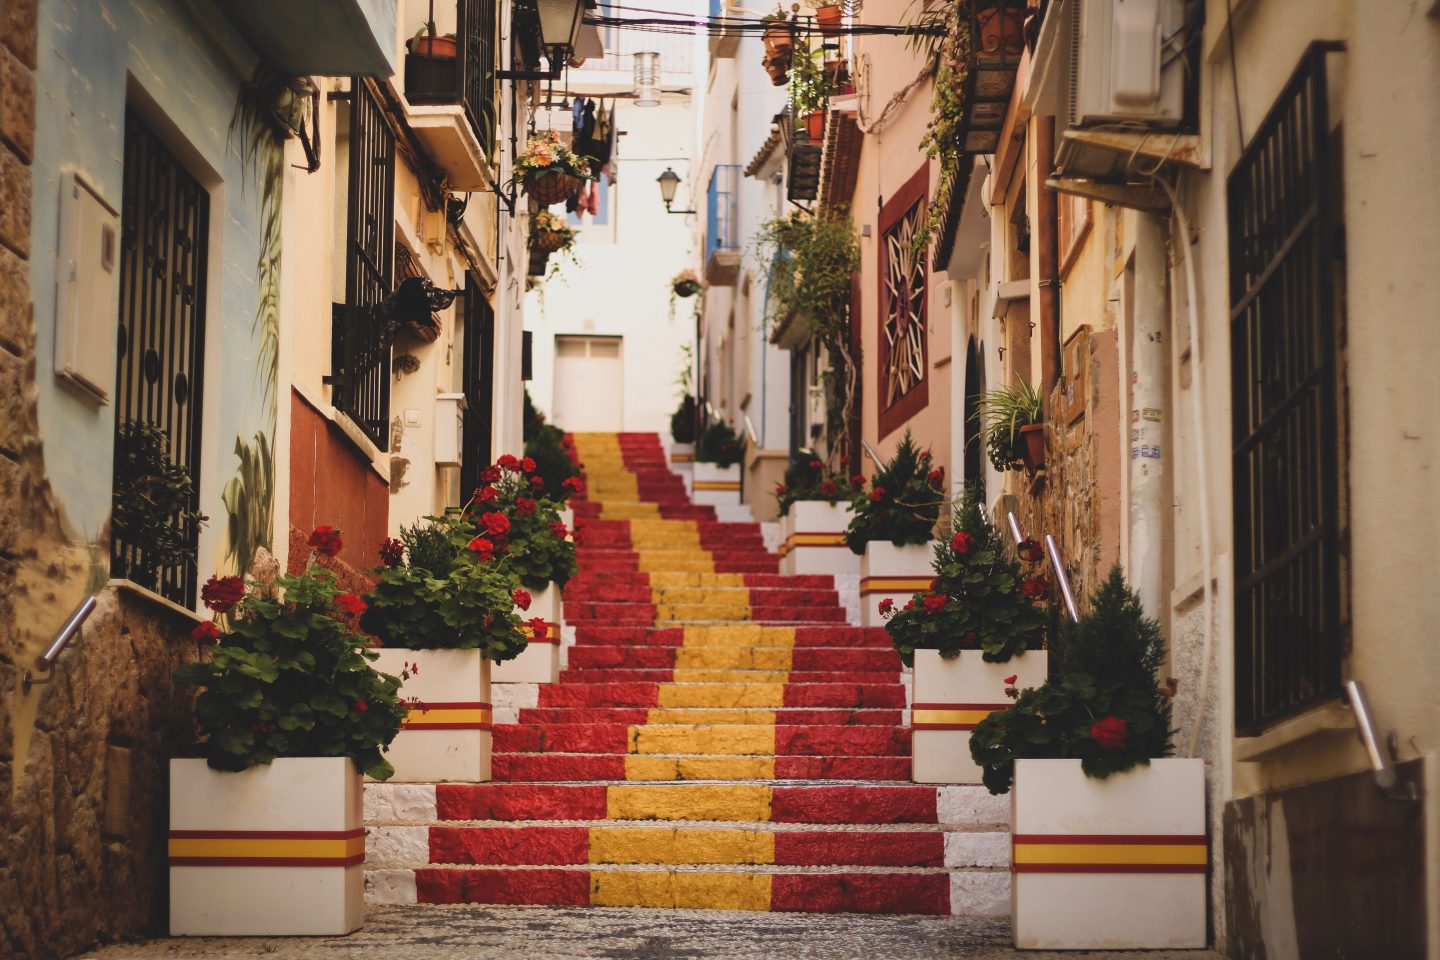 Steps painted with the Spanish flag